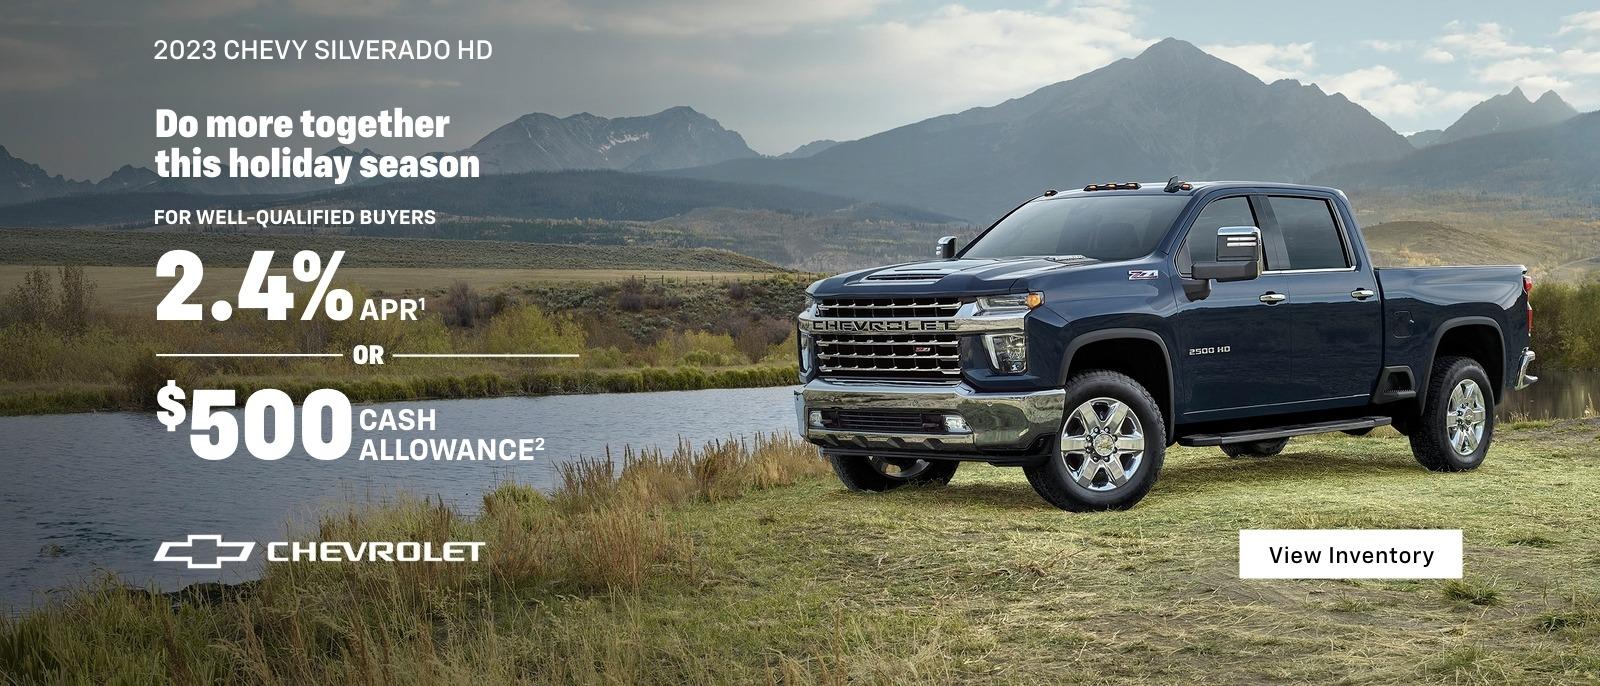 2023 Chevy Silverado HD. The strongest, most capable Silverado HD yet. For well-qualified buyers 2.4% APR. Or $500 cash allowance.